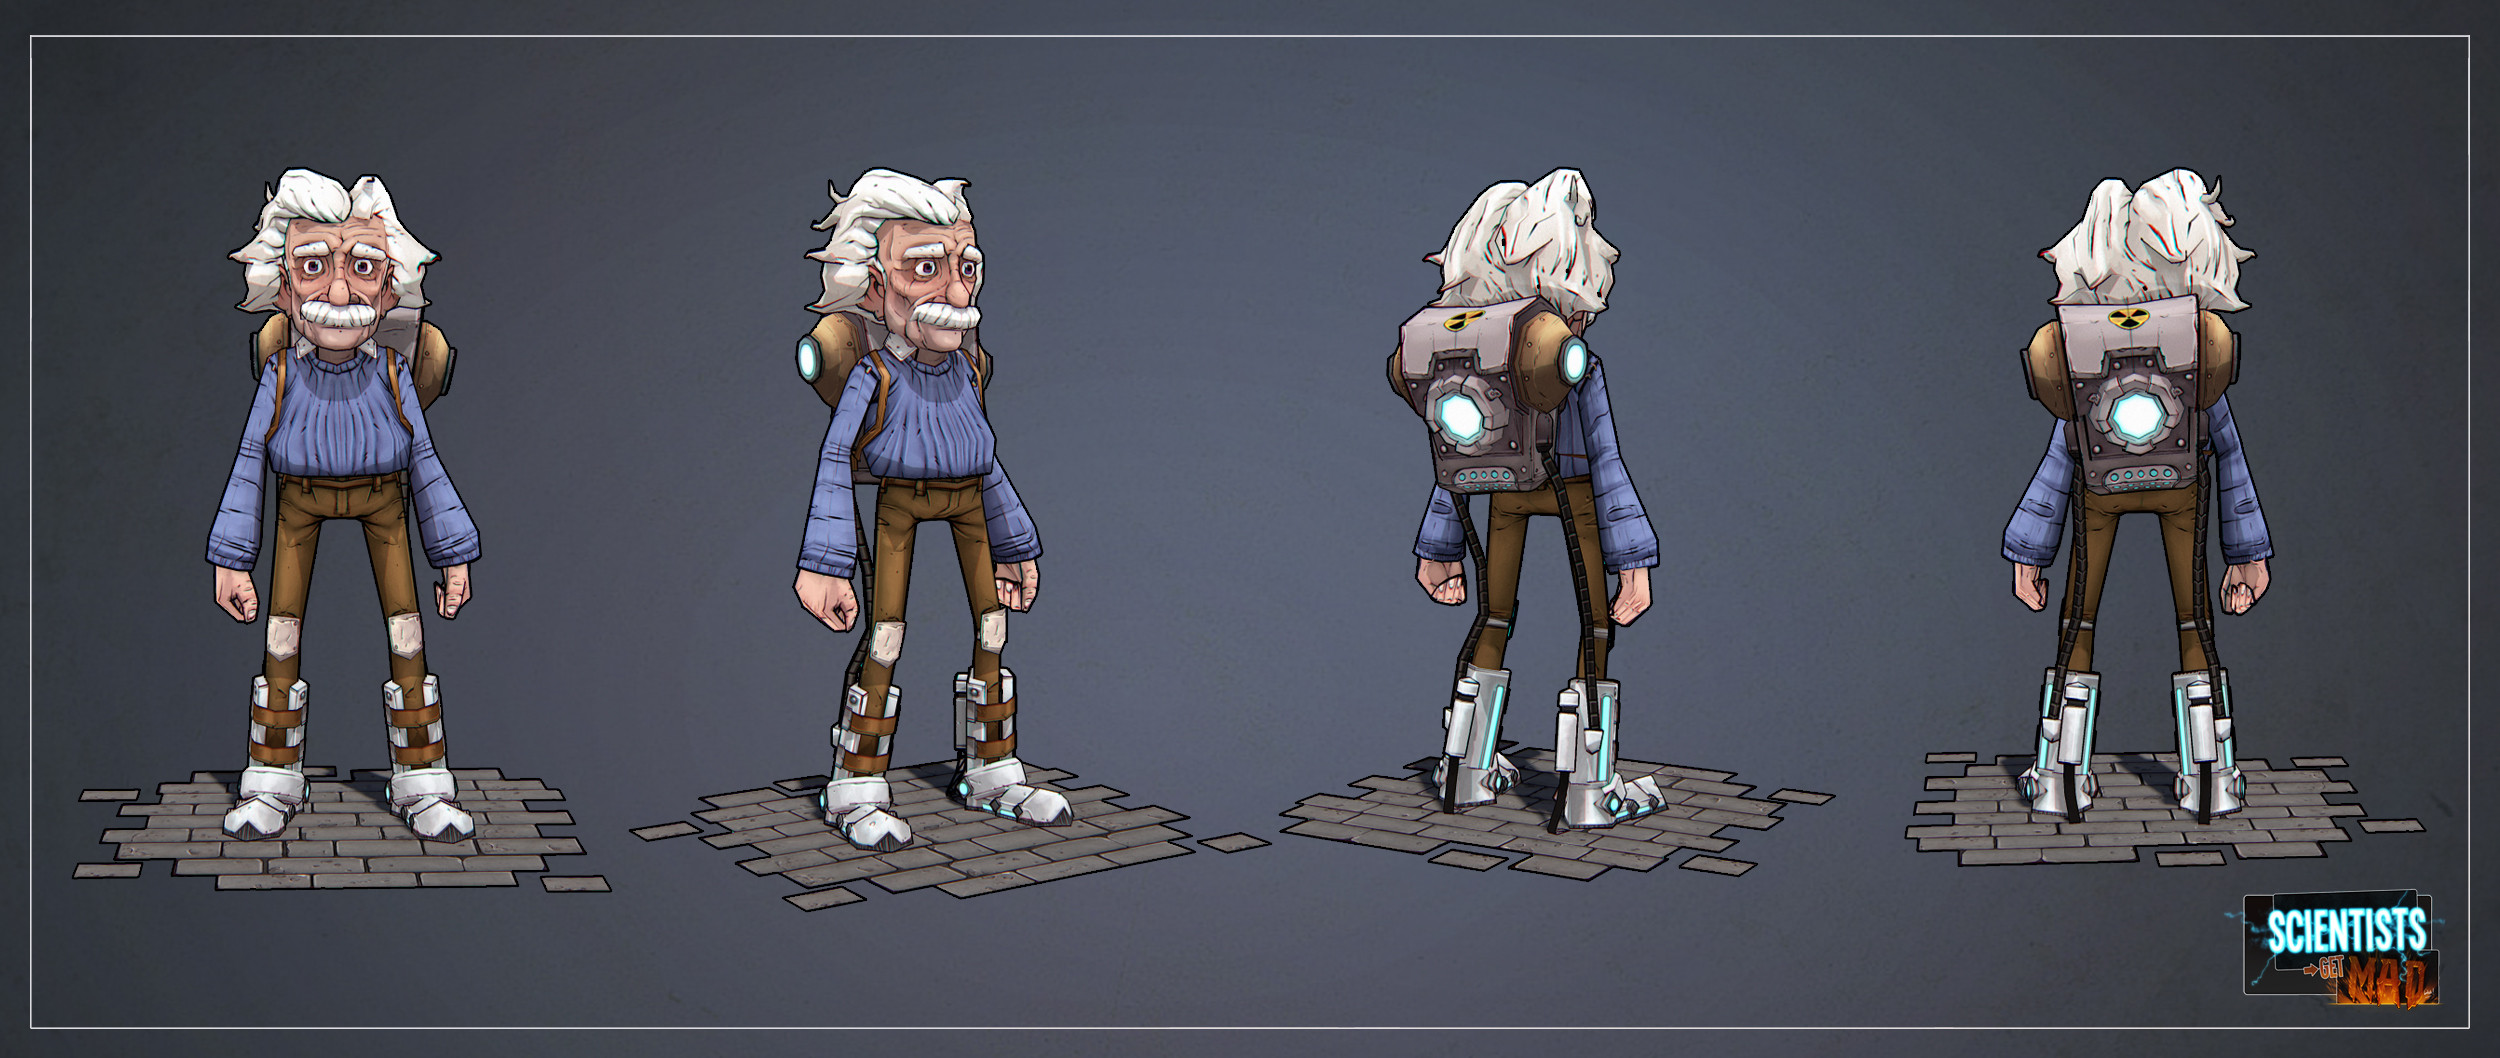 Einstein in game model (3d by Mario Ho-wen-ying, texture by me)